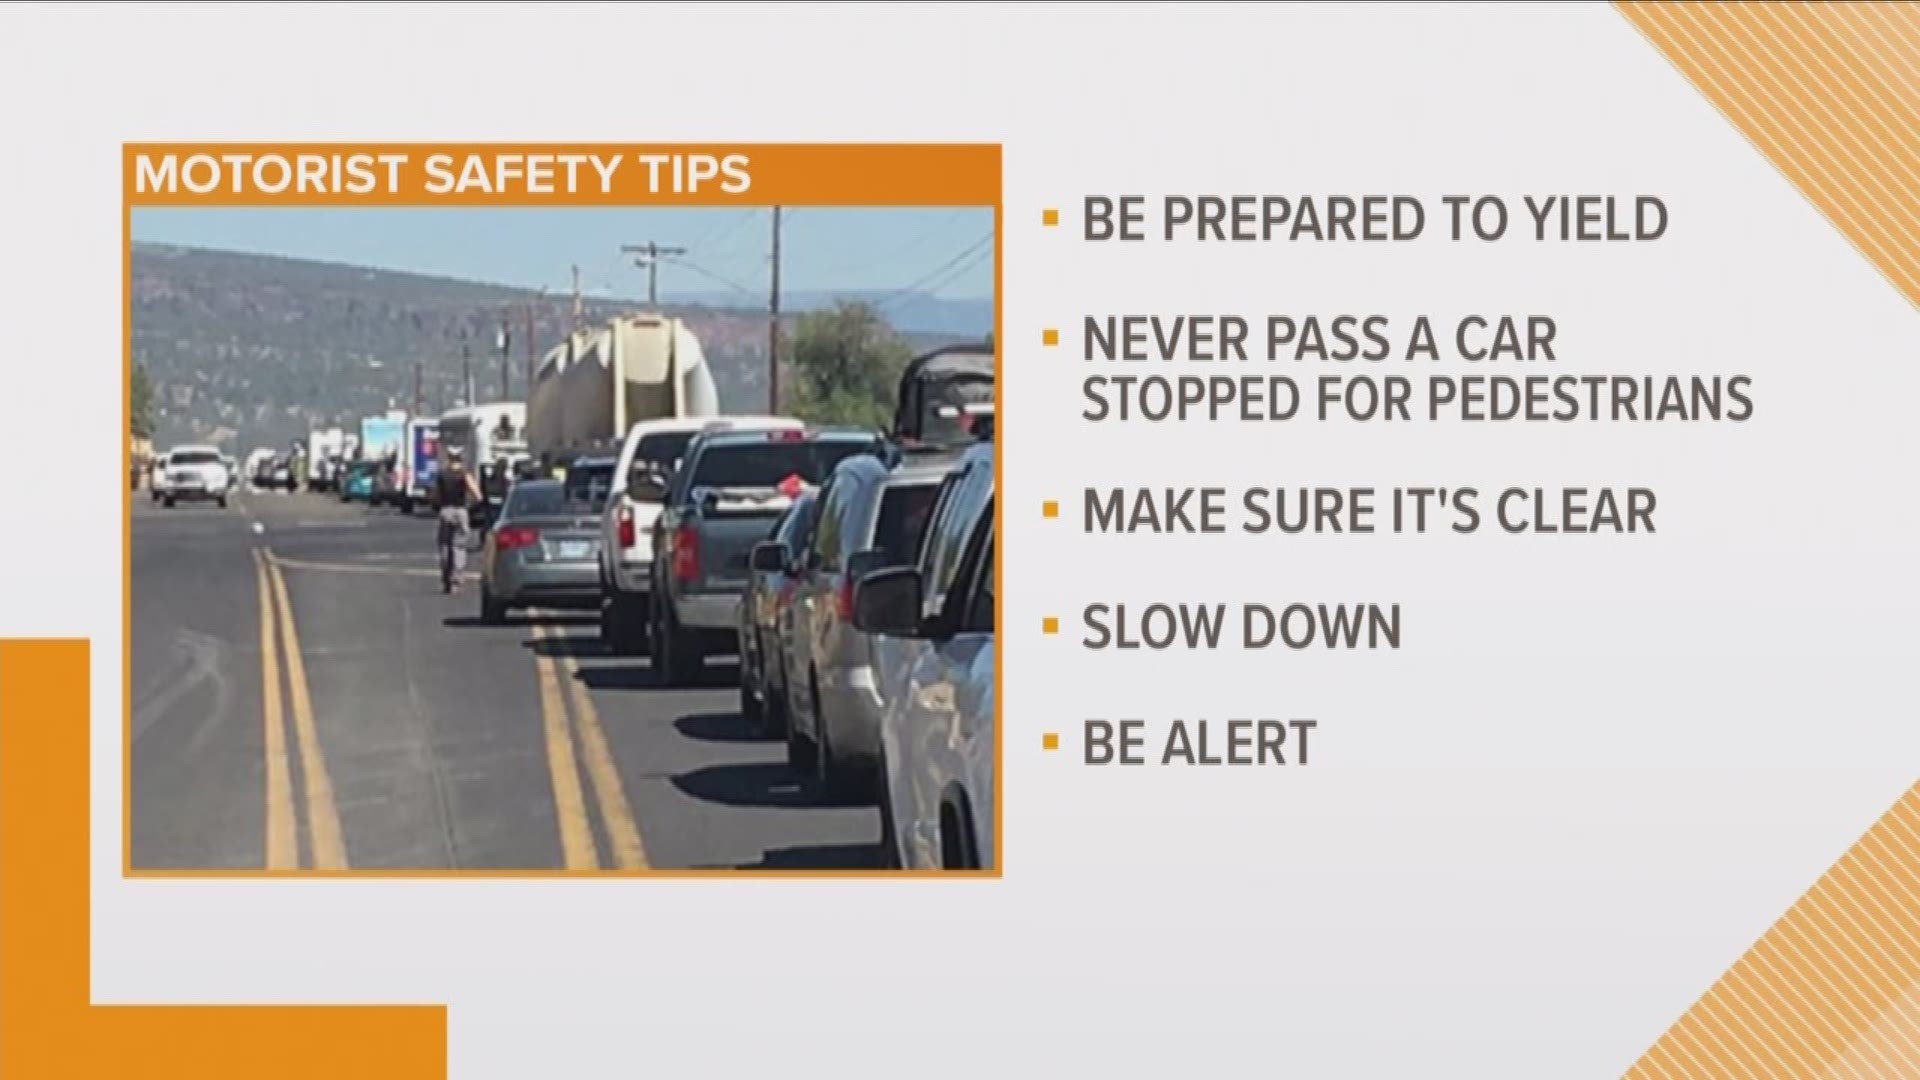 NCDOT Offers Driving Safety Tips